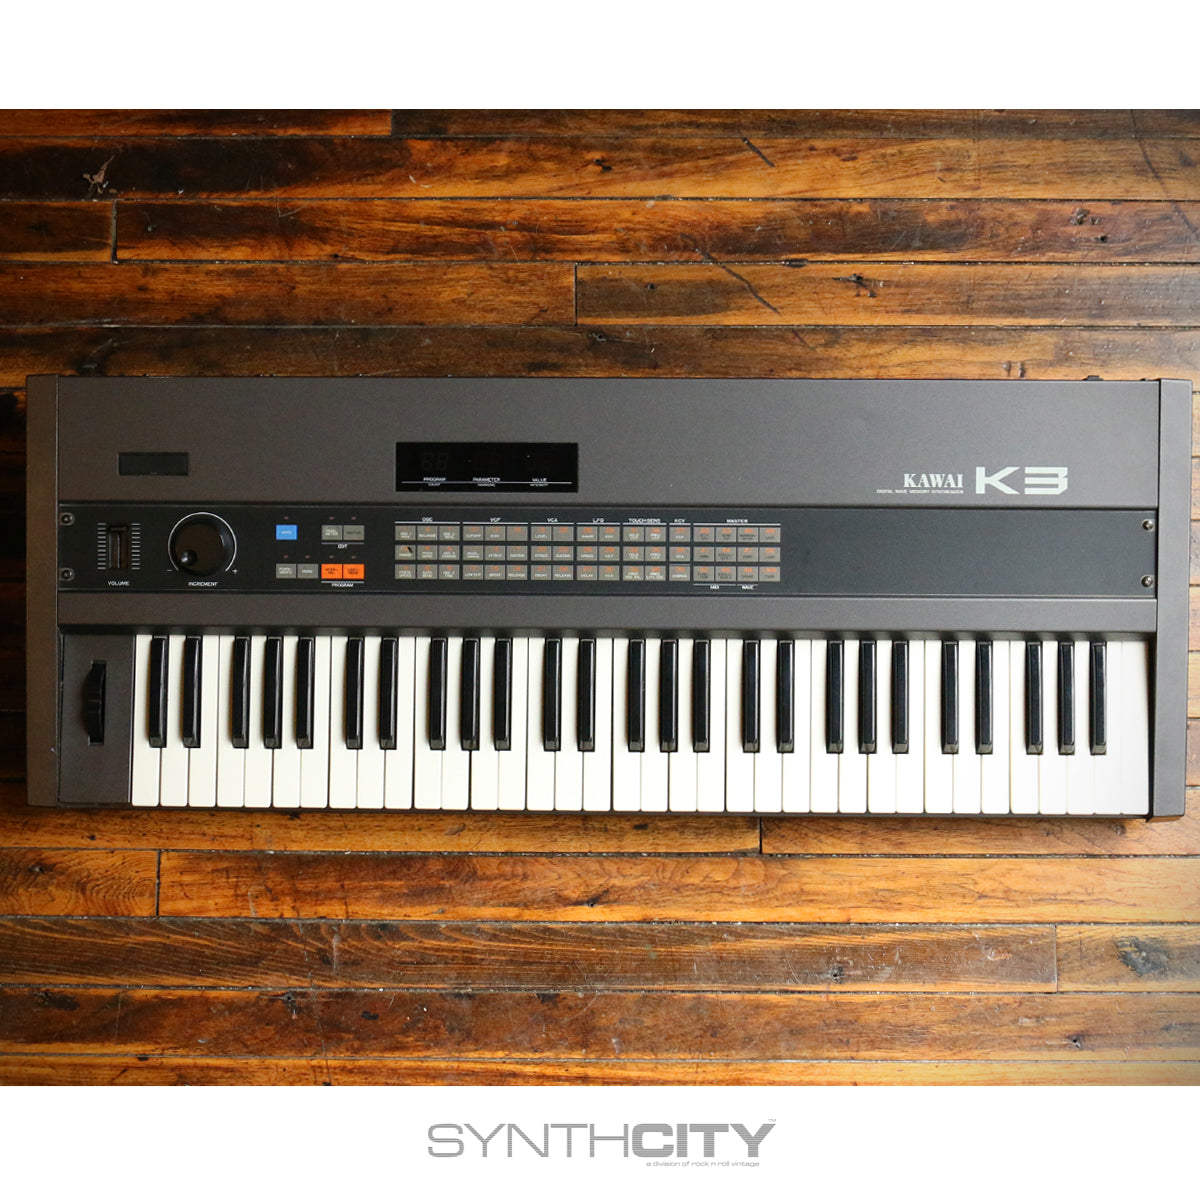 The Kawai K3 - A story of a very 80's Synthesizer 